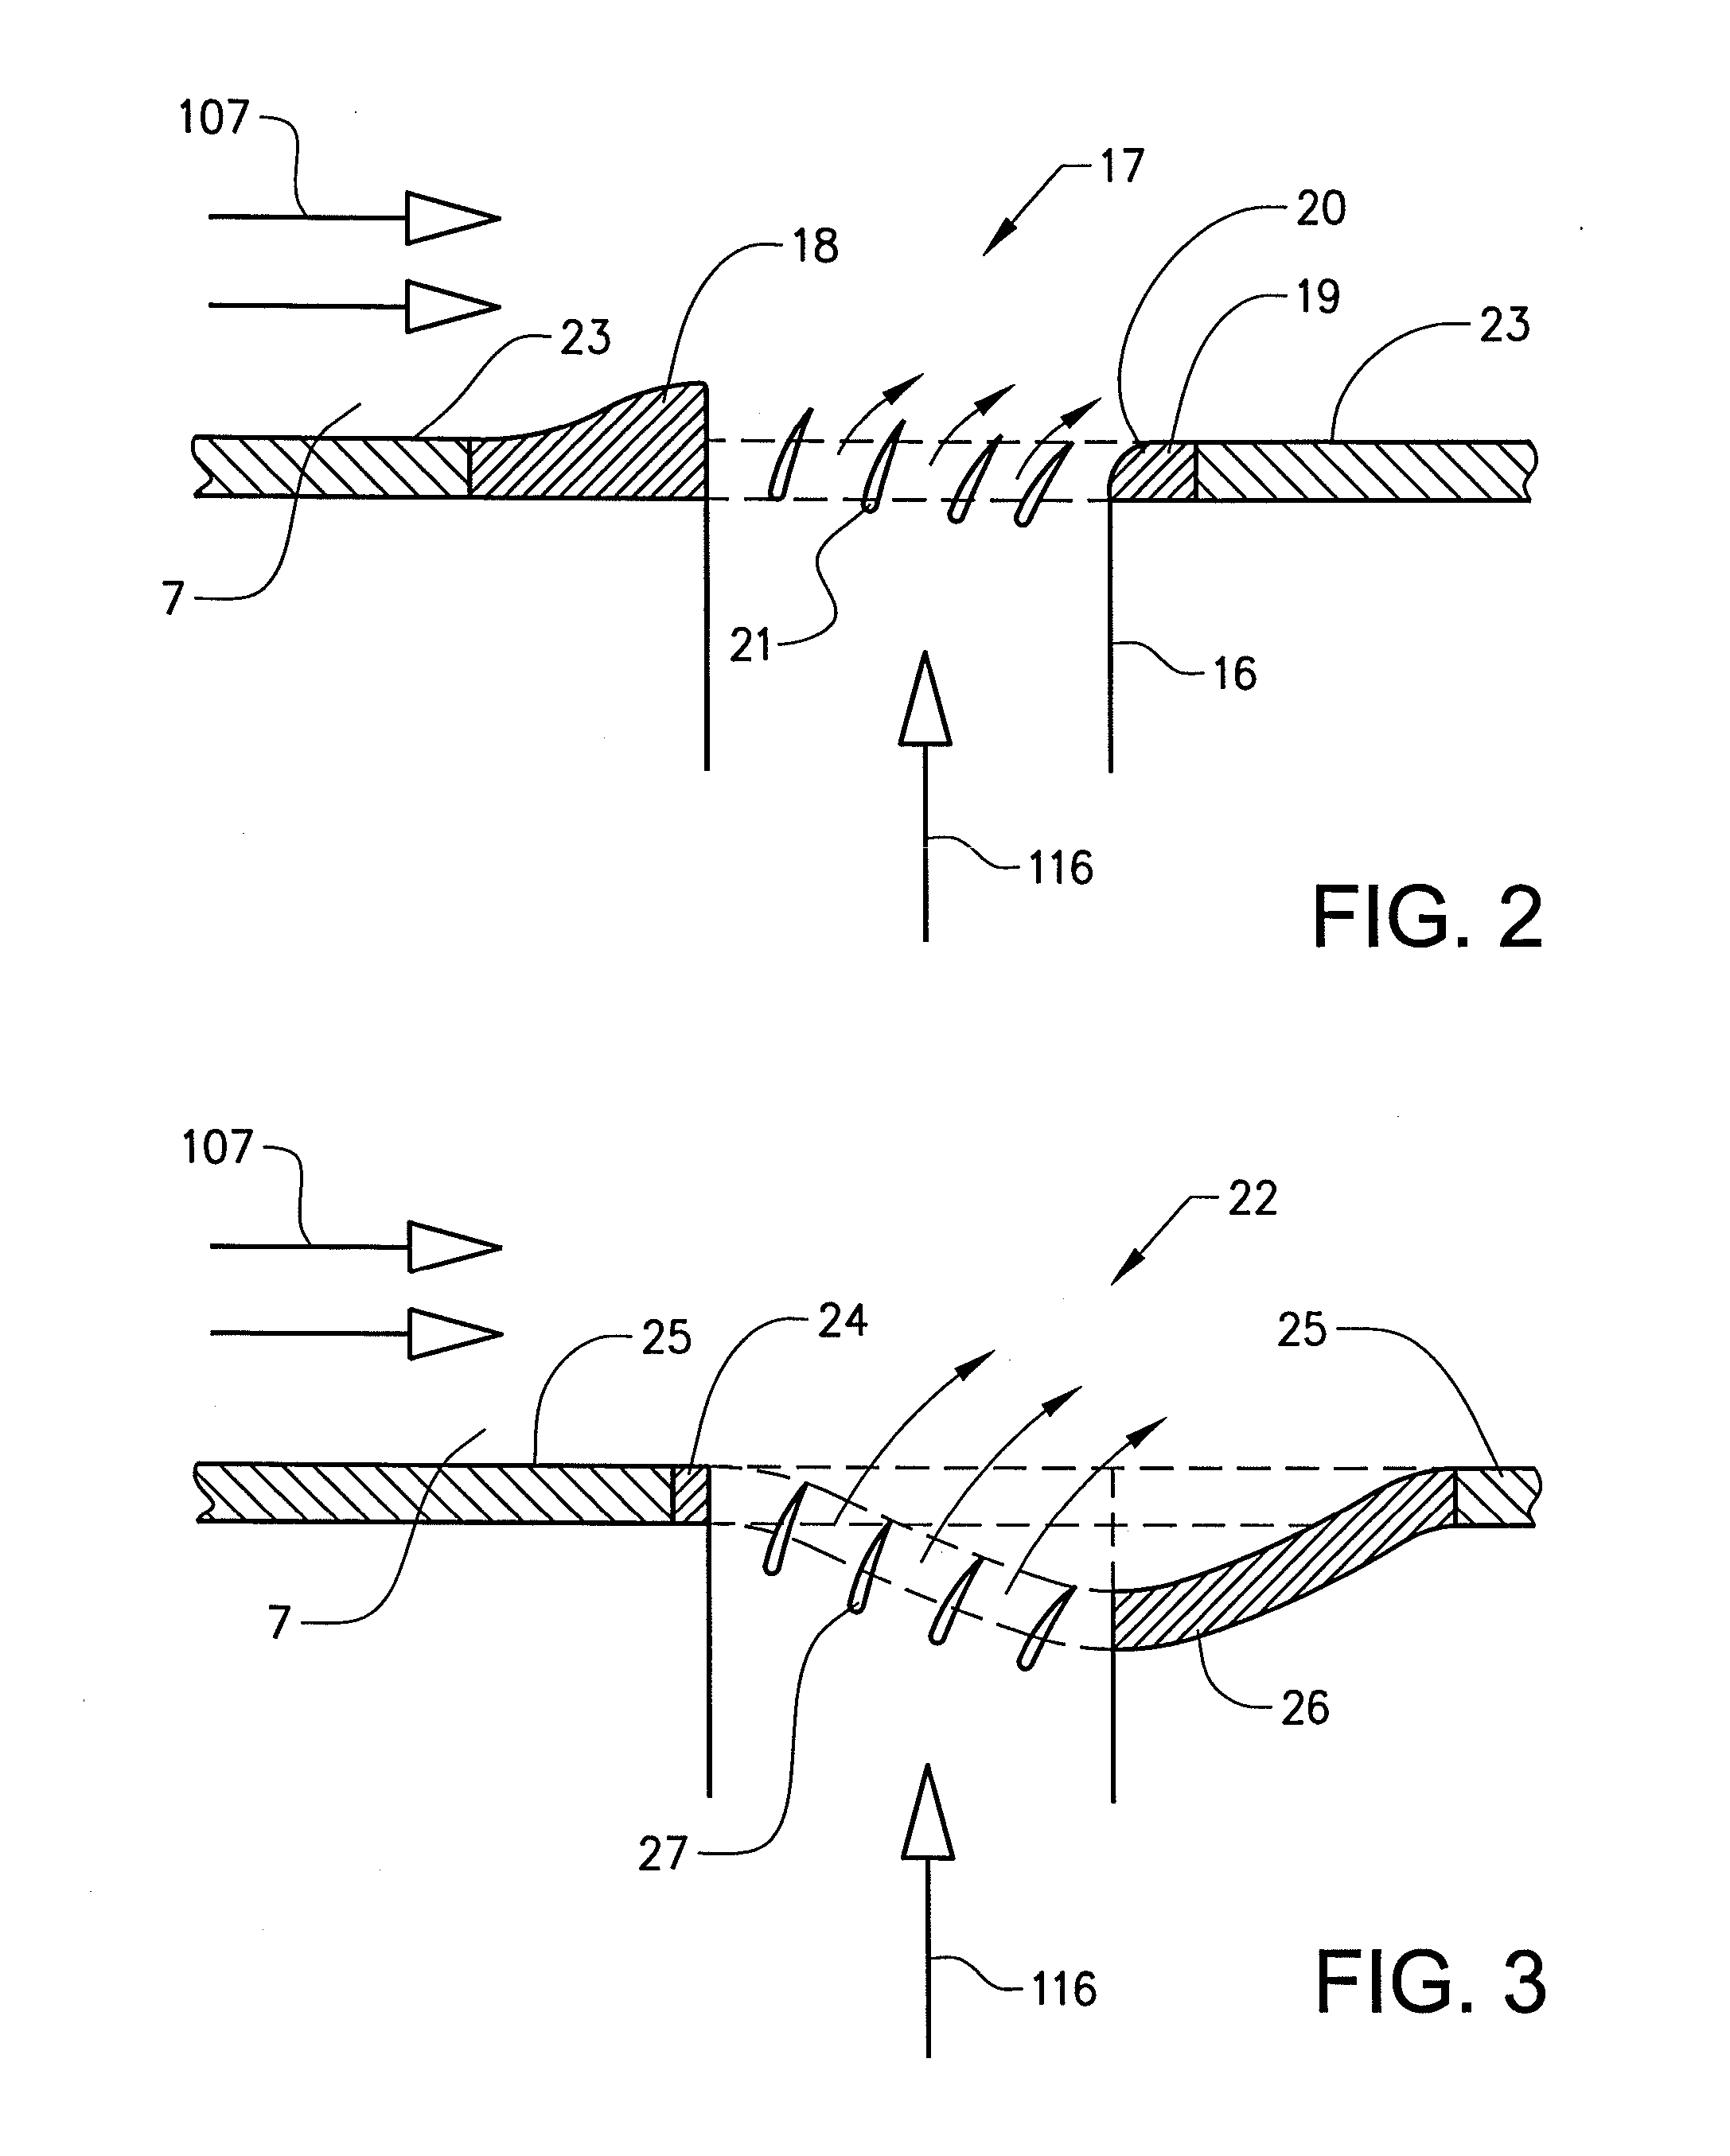 Bleed structure for a bleed passage in a gas turbine engine